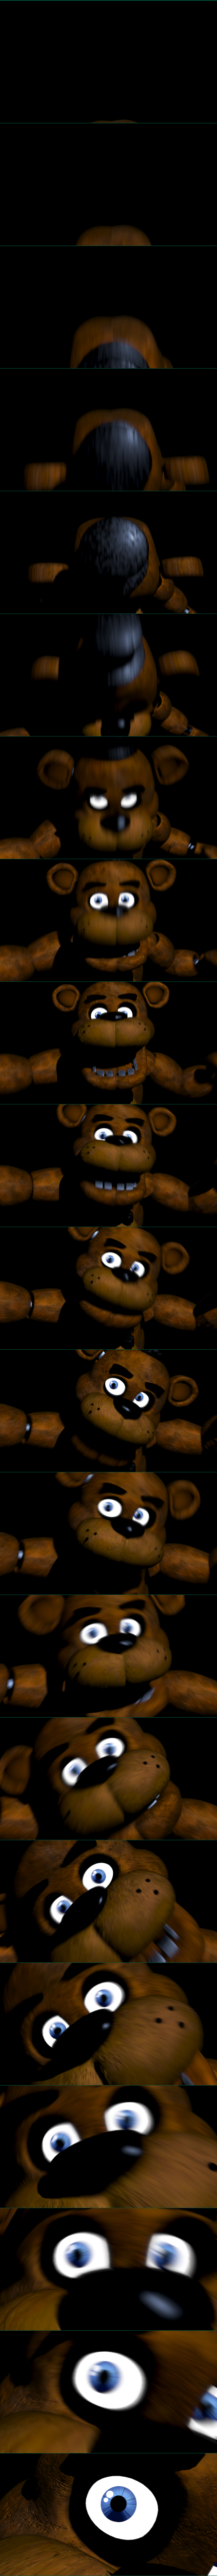 Five Nights at Freddy's - Freddy Jumpscare 1